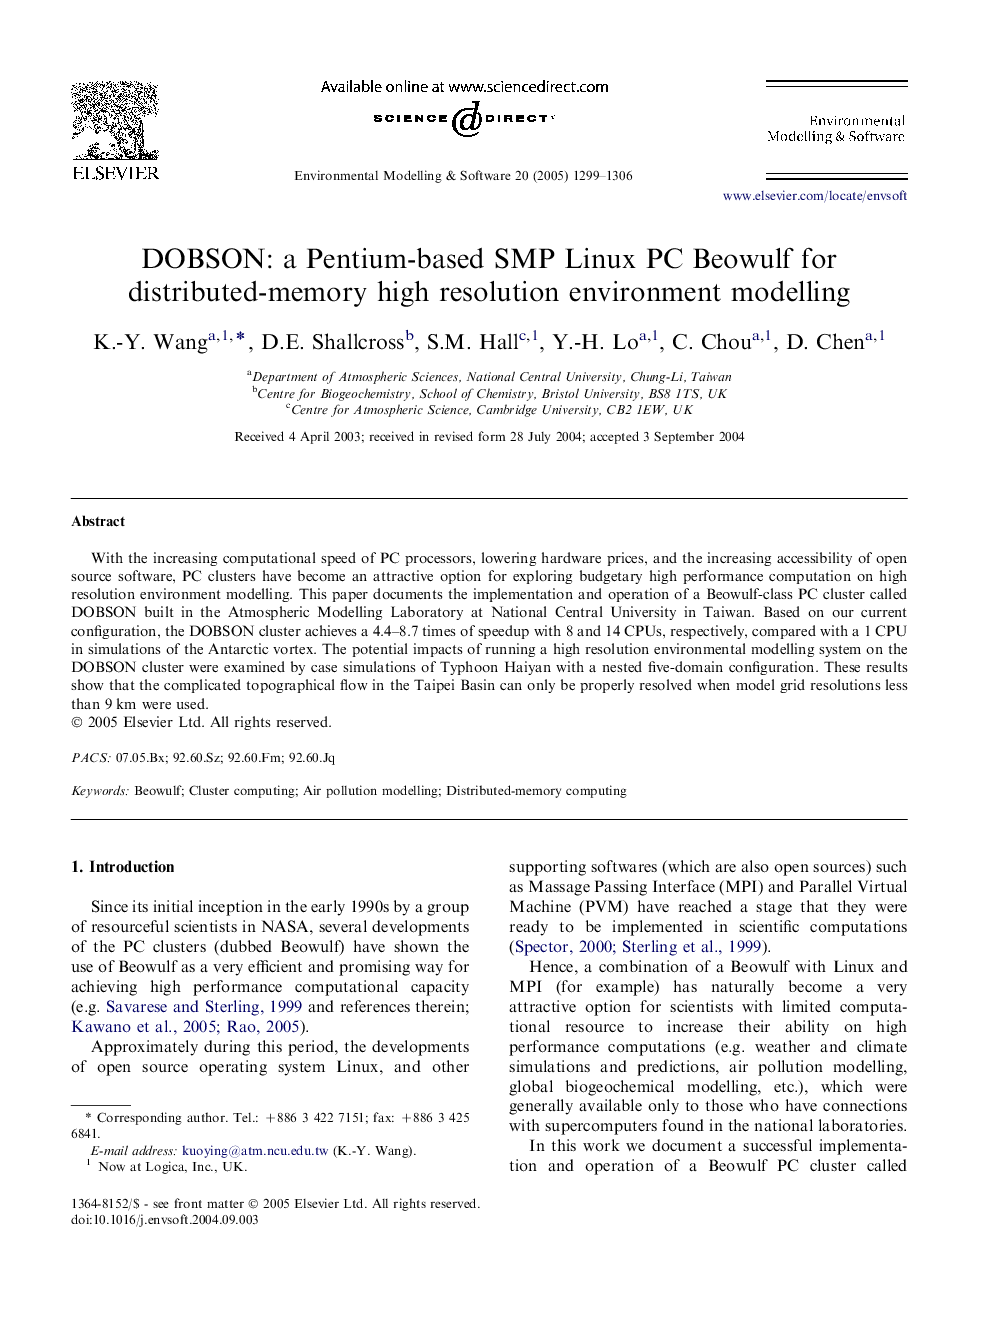 DOBSON: a Pentium-based SMP Linux PC Beowulf for distributed-memory high resolution environment modelling